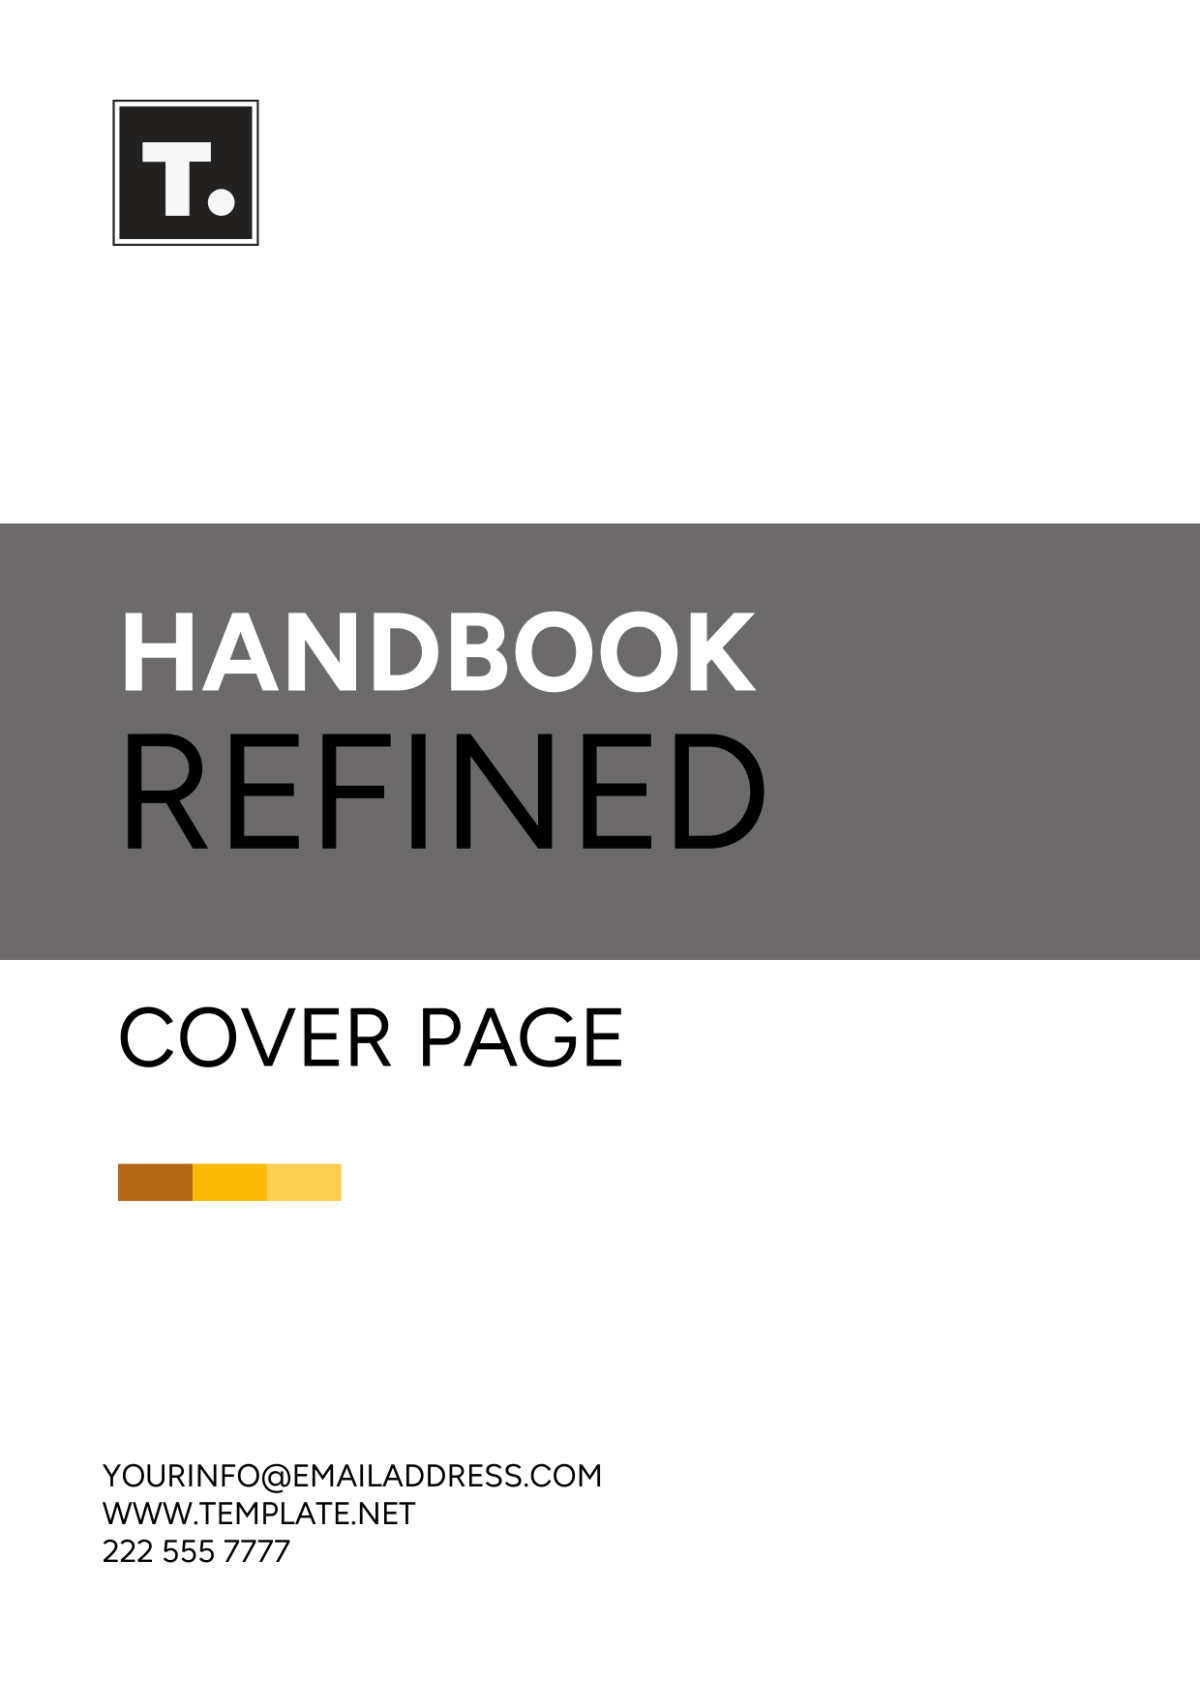 Handbook Refined Cover Page